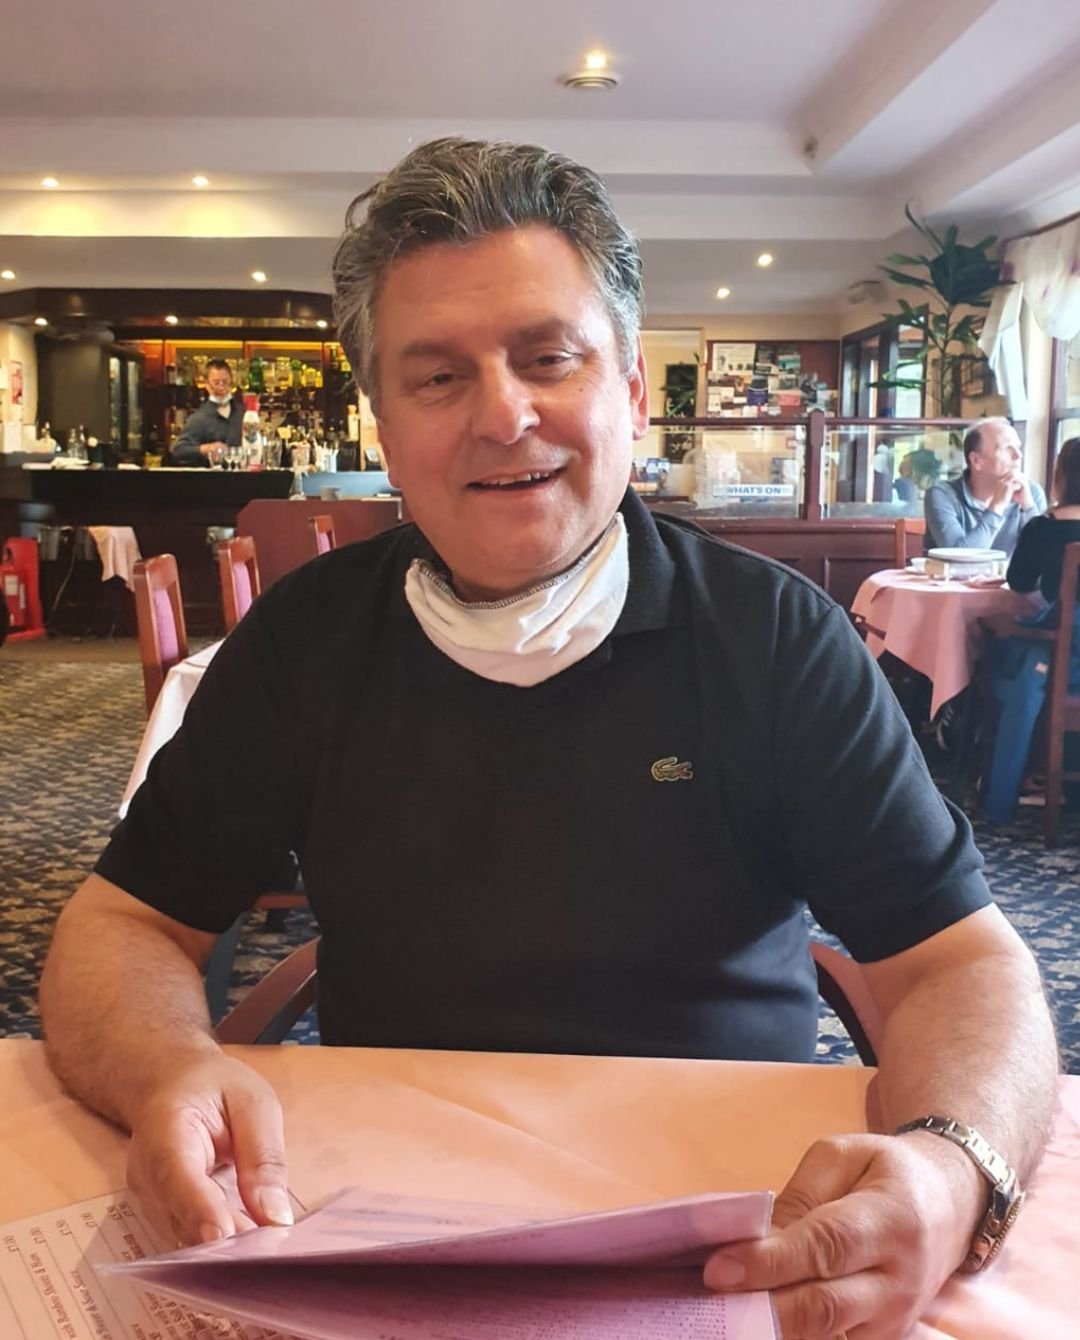 Tributes were paid to Portslade motorcyclist Nigel Peters, who died in Hassocks crash